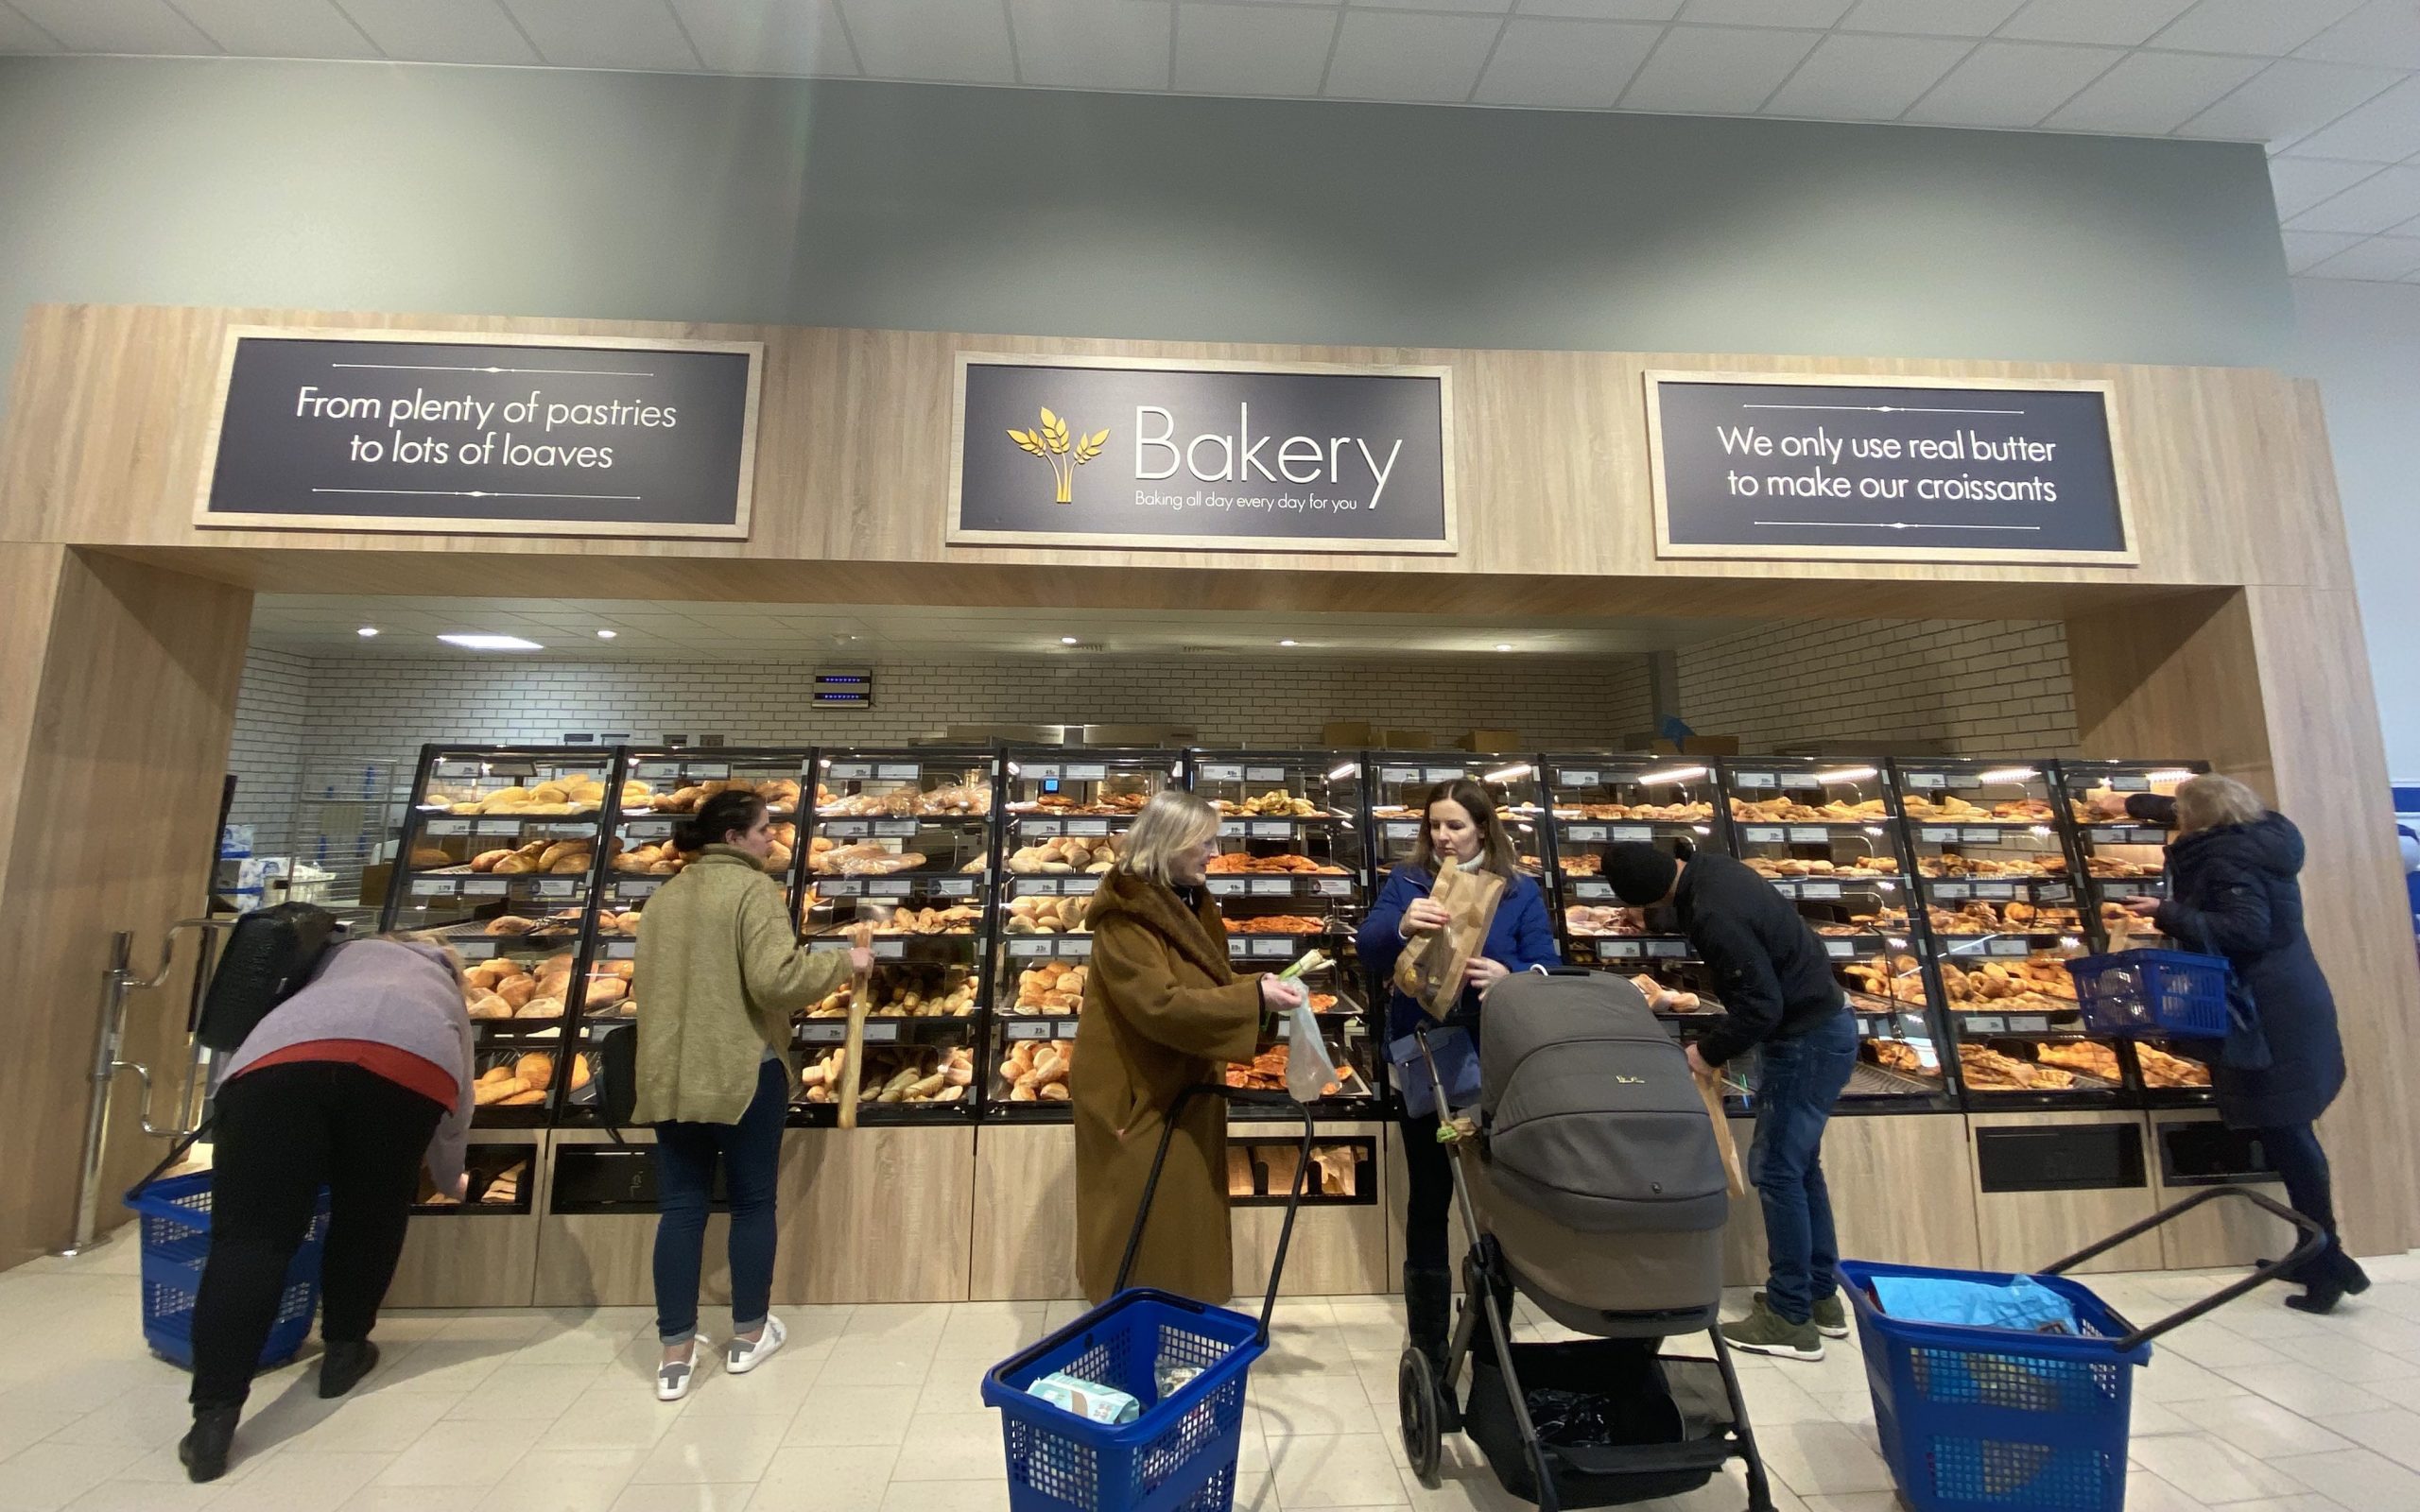 Bakery section in Lidl